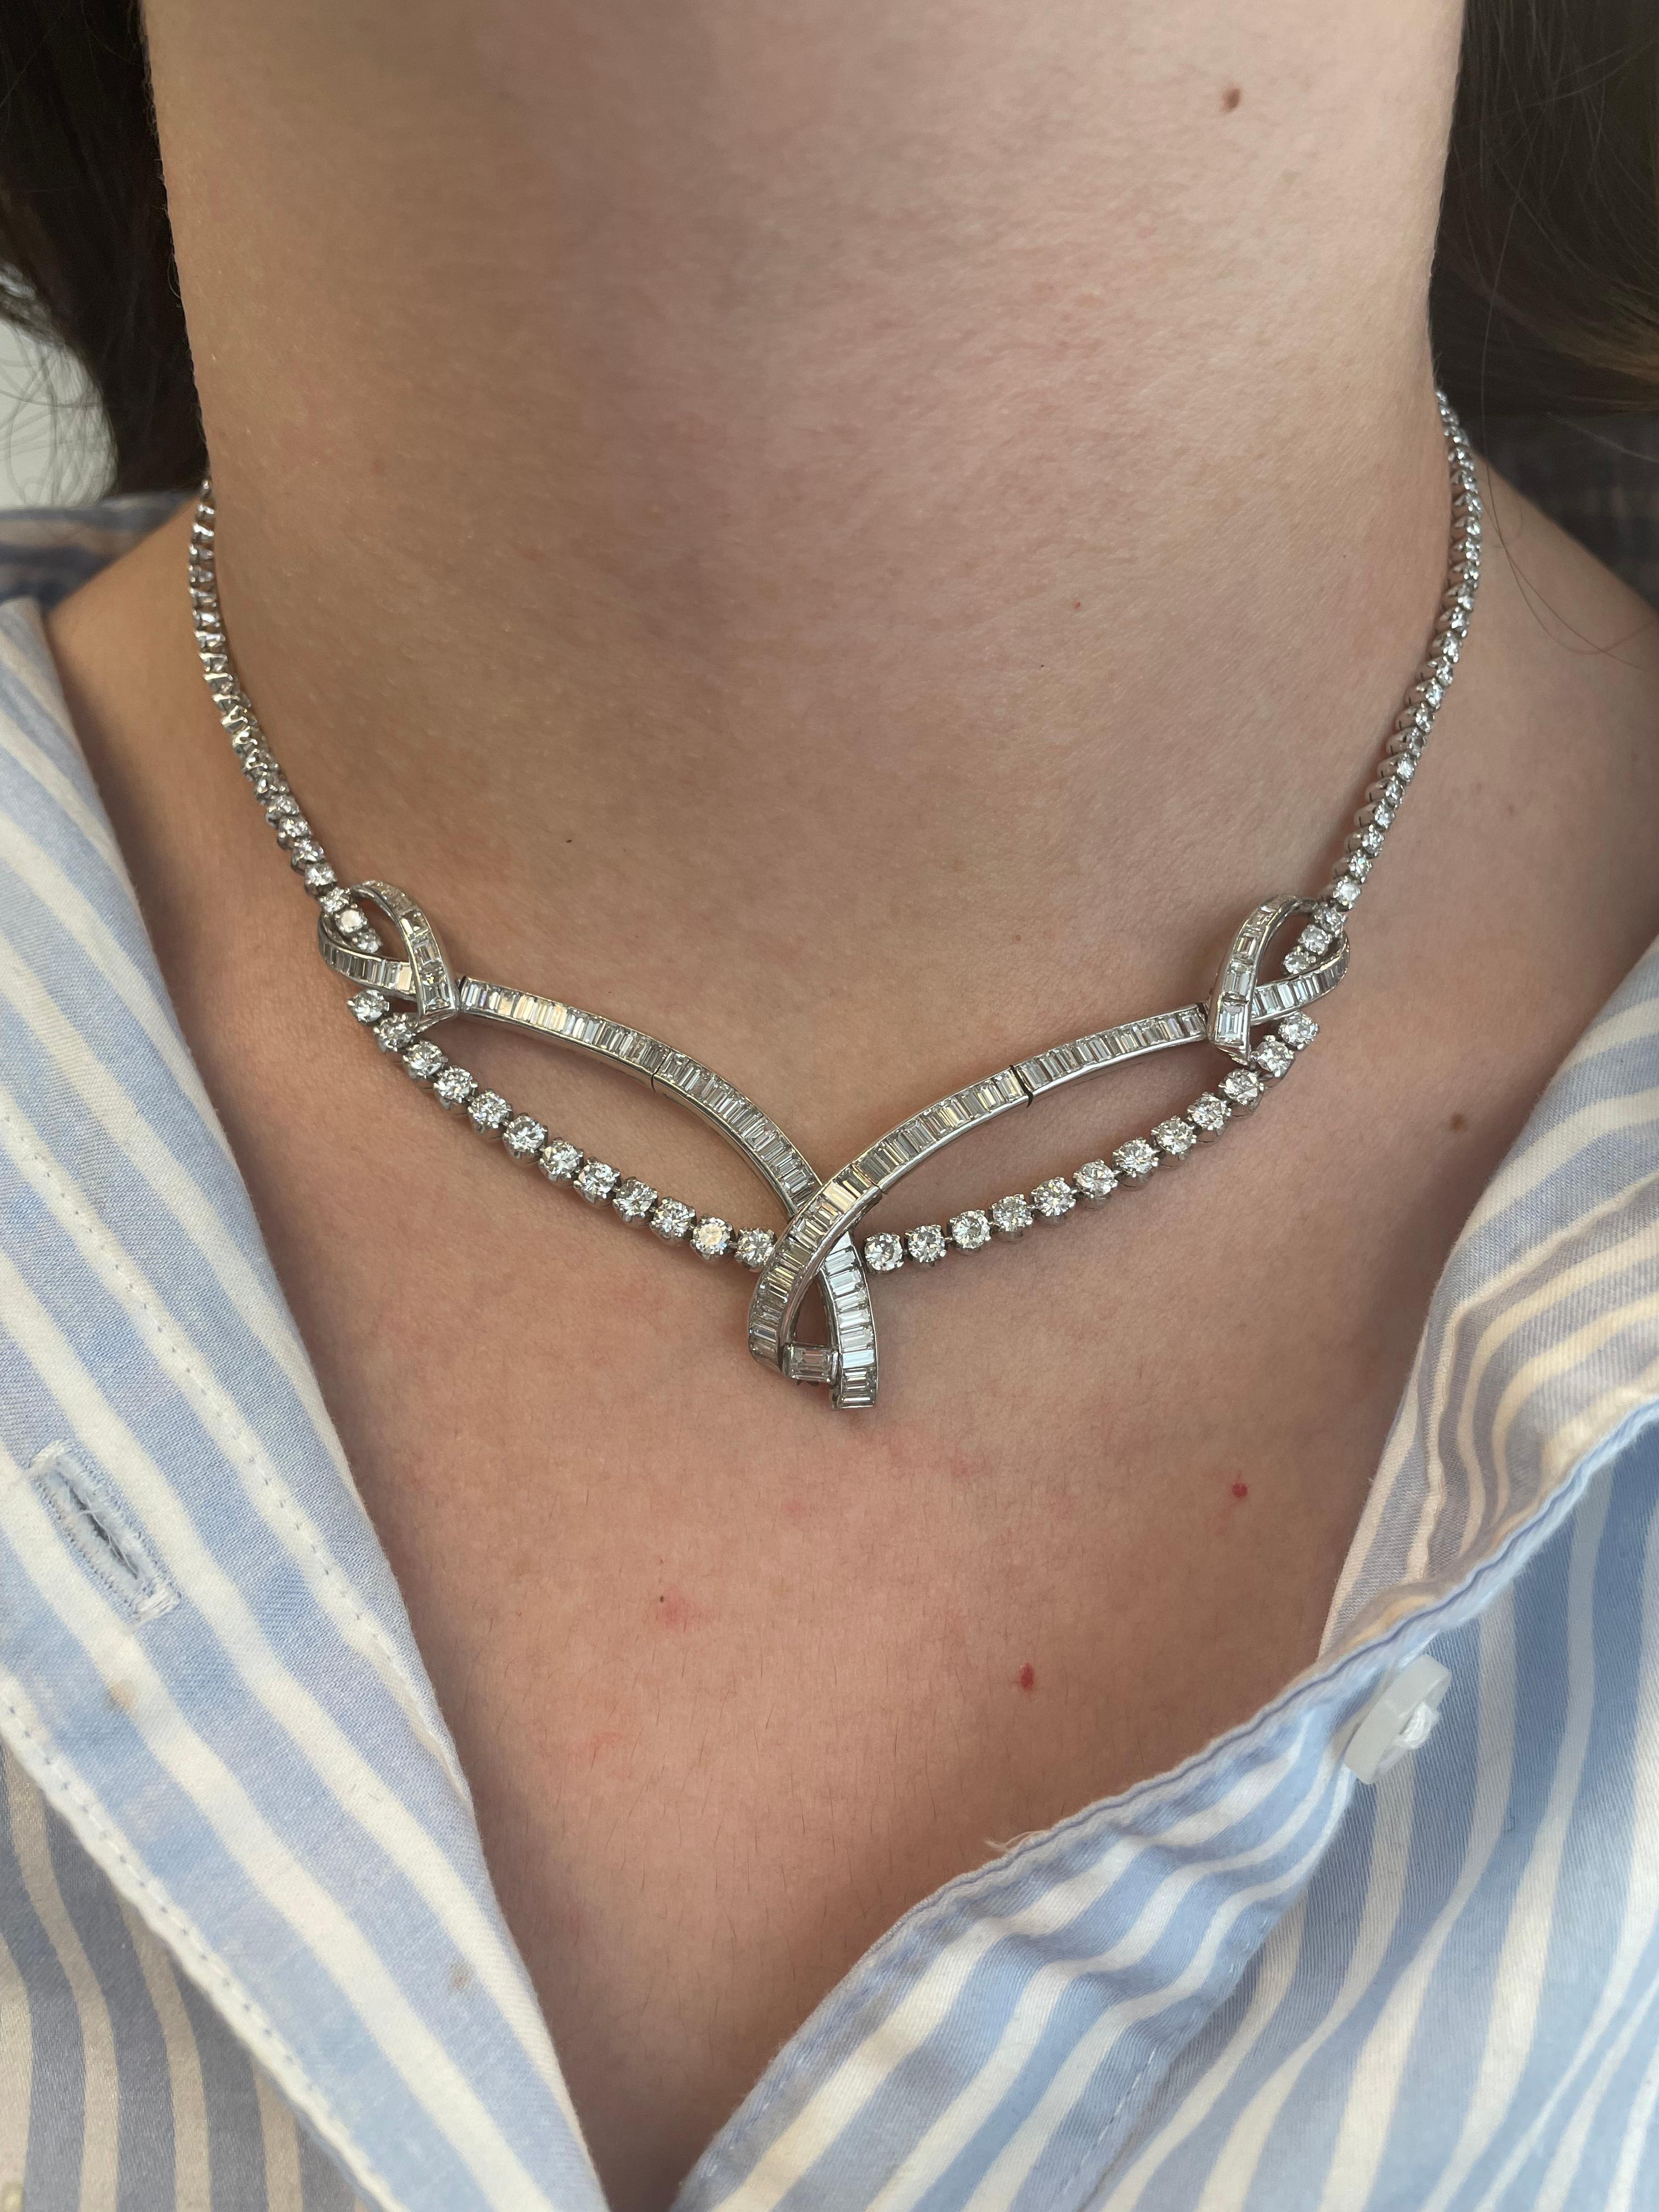 Lovely diamond crossover high jewelry necklace. 
Approximately 15.80 carats of baguette and round brilliant diamonds. Approximately H/I color and VS clarity. Platinum.
Accommodated with an up-to-date appraisal by a GIA G.G. once purchased, upon